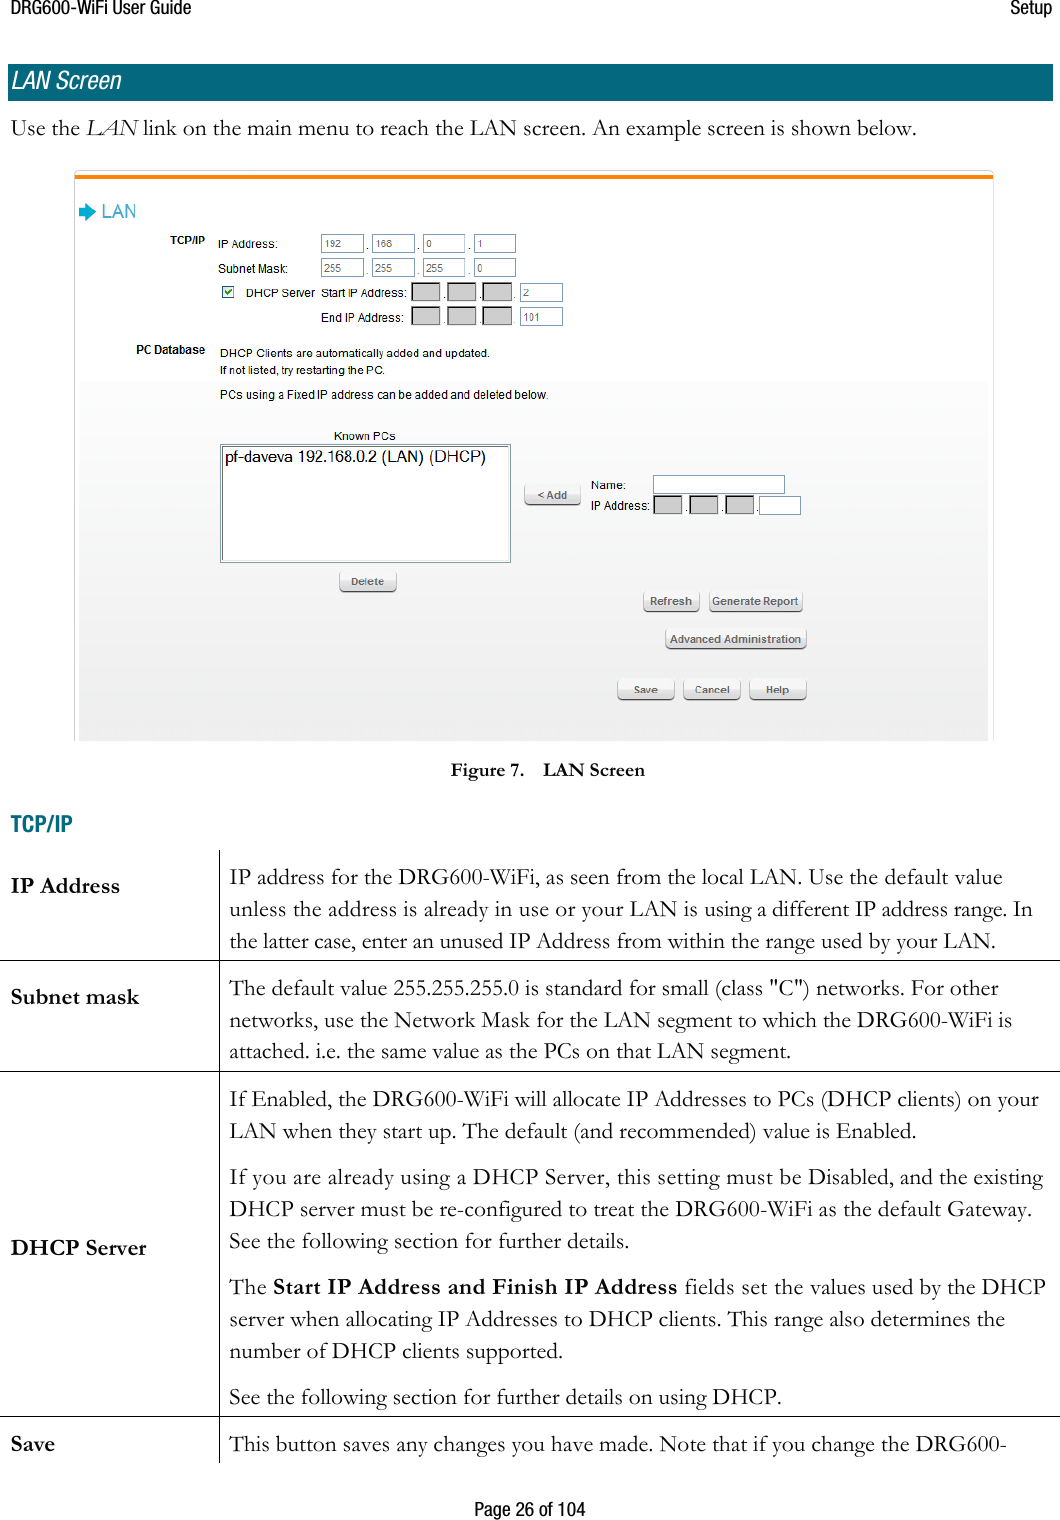 DRG600WiFi User Guide  Setup  Page 26 of 104 LAN Screen Use the LAN link on the main menu to reach the LAN screen. An example screen is shown below.  Figure 7. LAN Screen TCP/IP IP Address  IP address for the DRG600-WiFi, as seen from the local LAN. Use the default value unless the address is already in use or your LAN is using a different IP address range. In the latter case, enter an unused IP Address from within the range used by your LAN. Subnet mask  The default value 255.255.255.0 is standard for small (class &quot;C&quot;) networks. For other networks, use the Network Mask for the LAN segment to which the DRG600-WiFi is attached. i.e. the same value as the PCs on that LAN segment. DHCP Server If Enabled, the DRG600-WiFi will allocate IP Addresses to PCs (DHCP clients) on your LAN when they start up. The default (and recommended) value is Enabled. If you are already using a DHCP Server, this setting must be Disabled, and the existing DHCP server must be re-configured to treat the DRG600-WiFi as the default Gateway. See the following section for further details. The Start IP Address and Finish IP Address fields set the values used by the DHCP server when allocating IP Addresses to DHCP clients. This range also determines the number of DHCP clients supported. See the following section for further details on using DHCP. Save  This button saves any changes you have made. Note that if you change the DRG600-